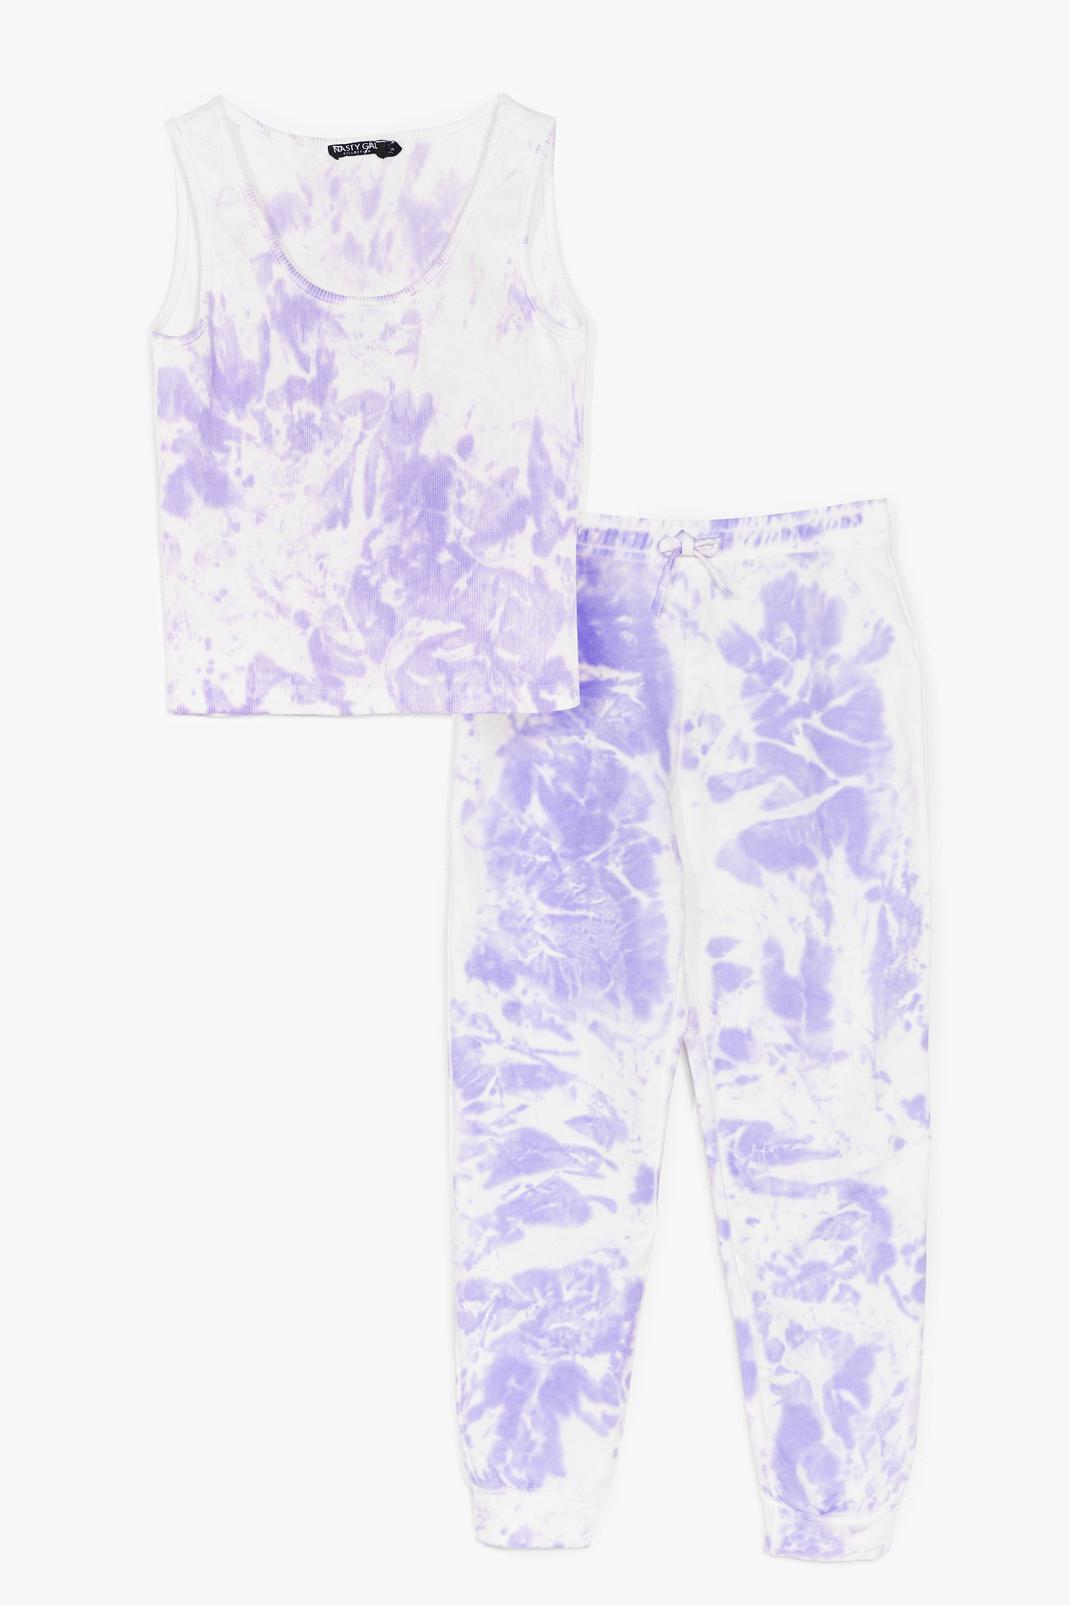 Turn It Up Tie Dye Top and Jogger Set image number 1